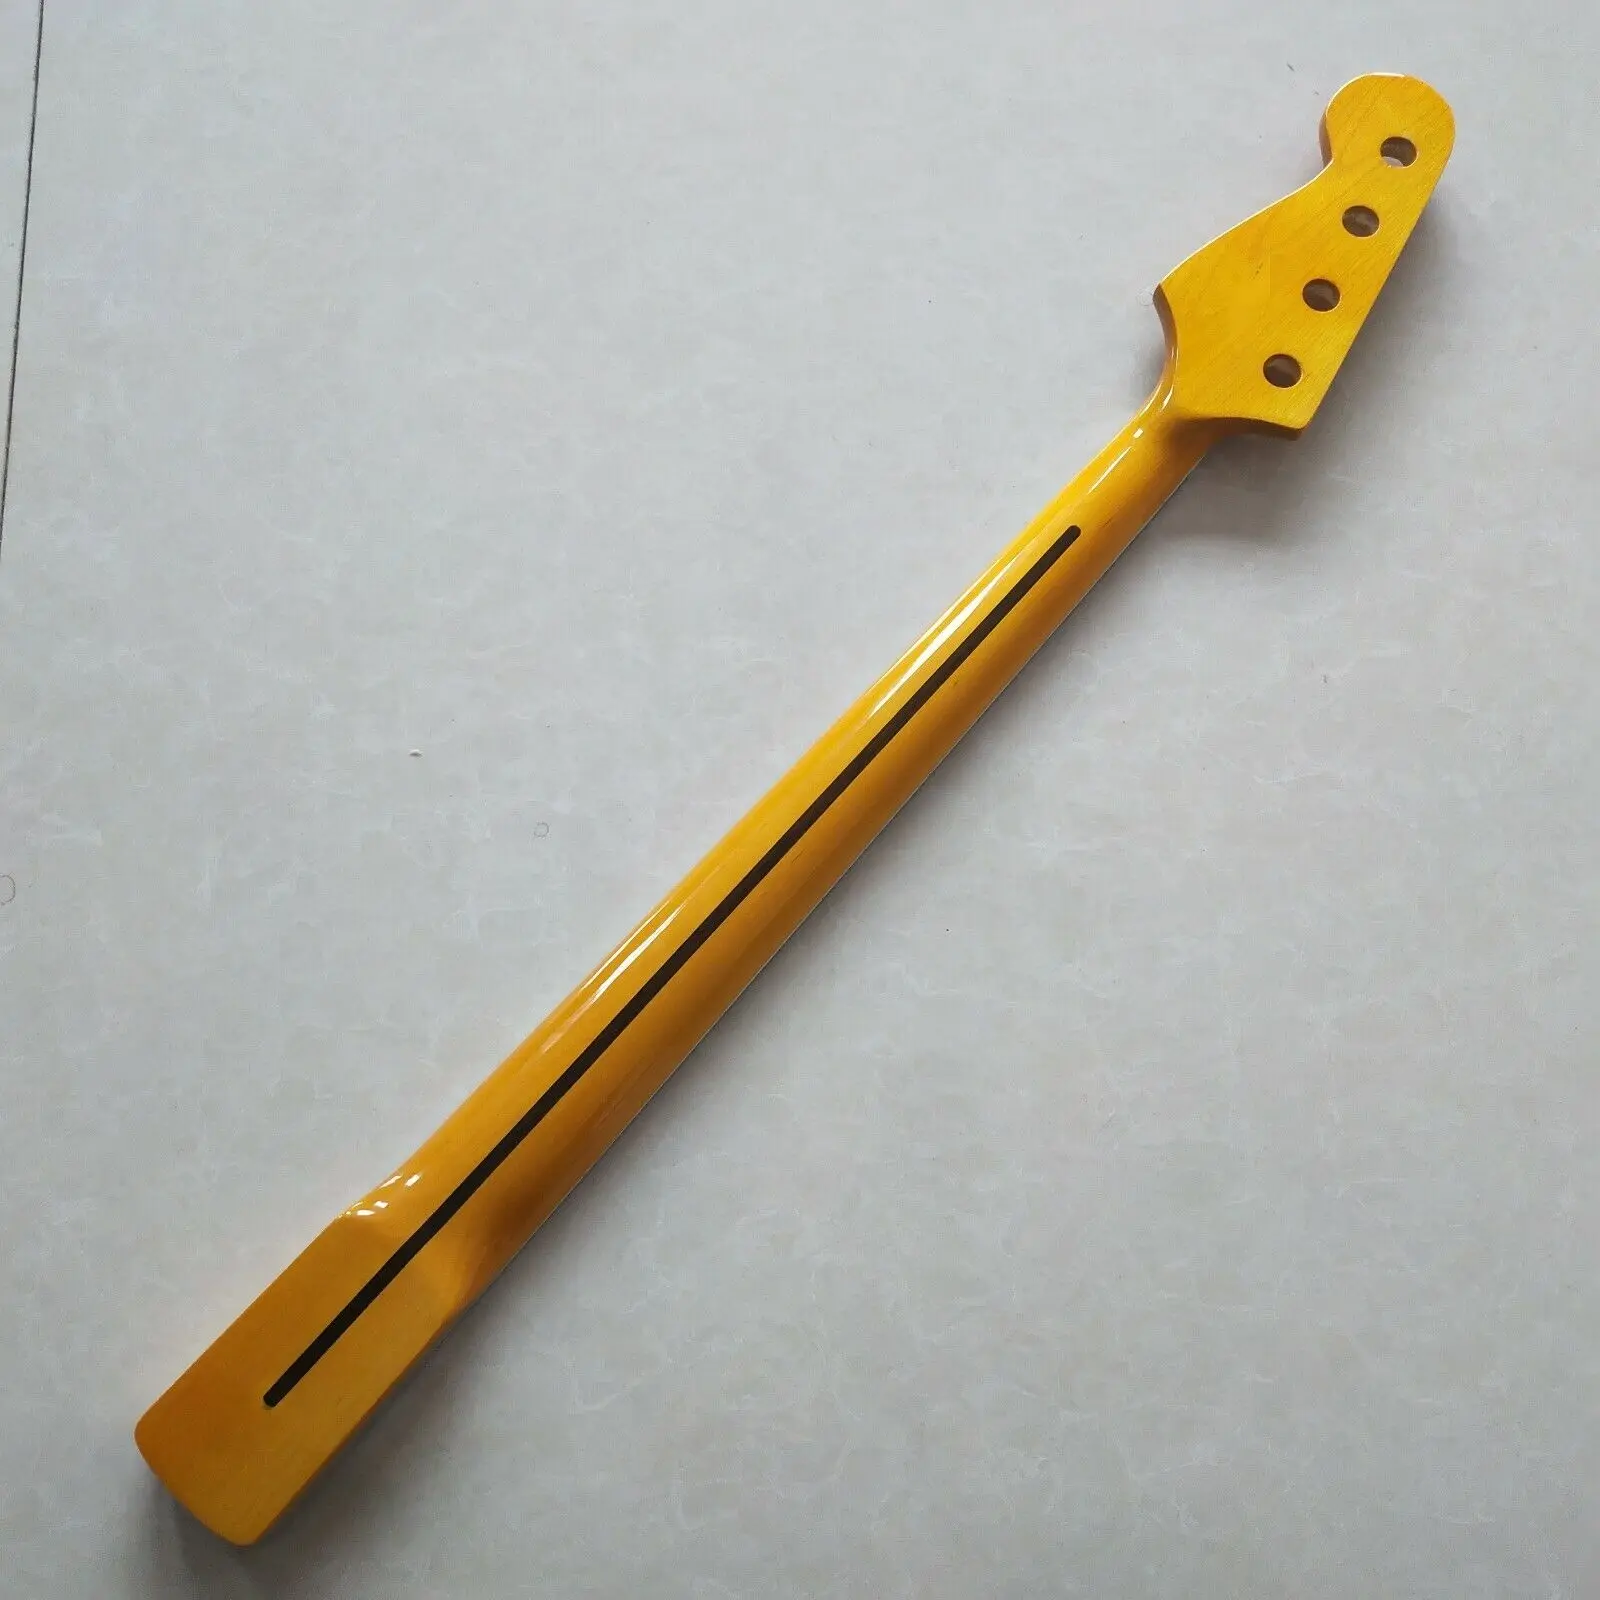 New Yellow J bass guitar neck parts 20 fret 34inch Rosewood Fretboard Vine Inlay enlarge